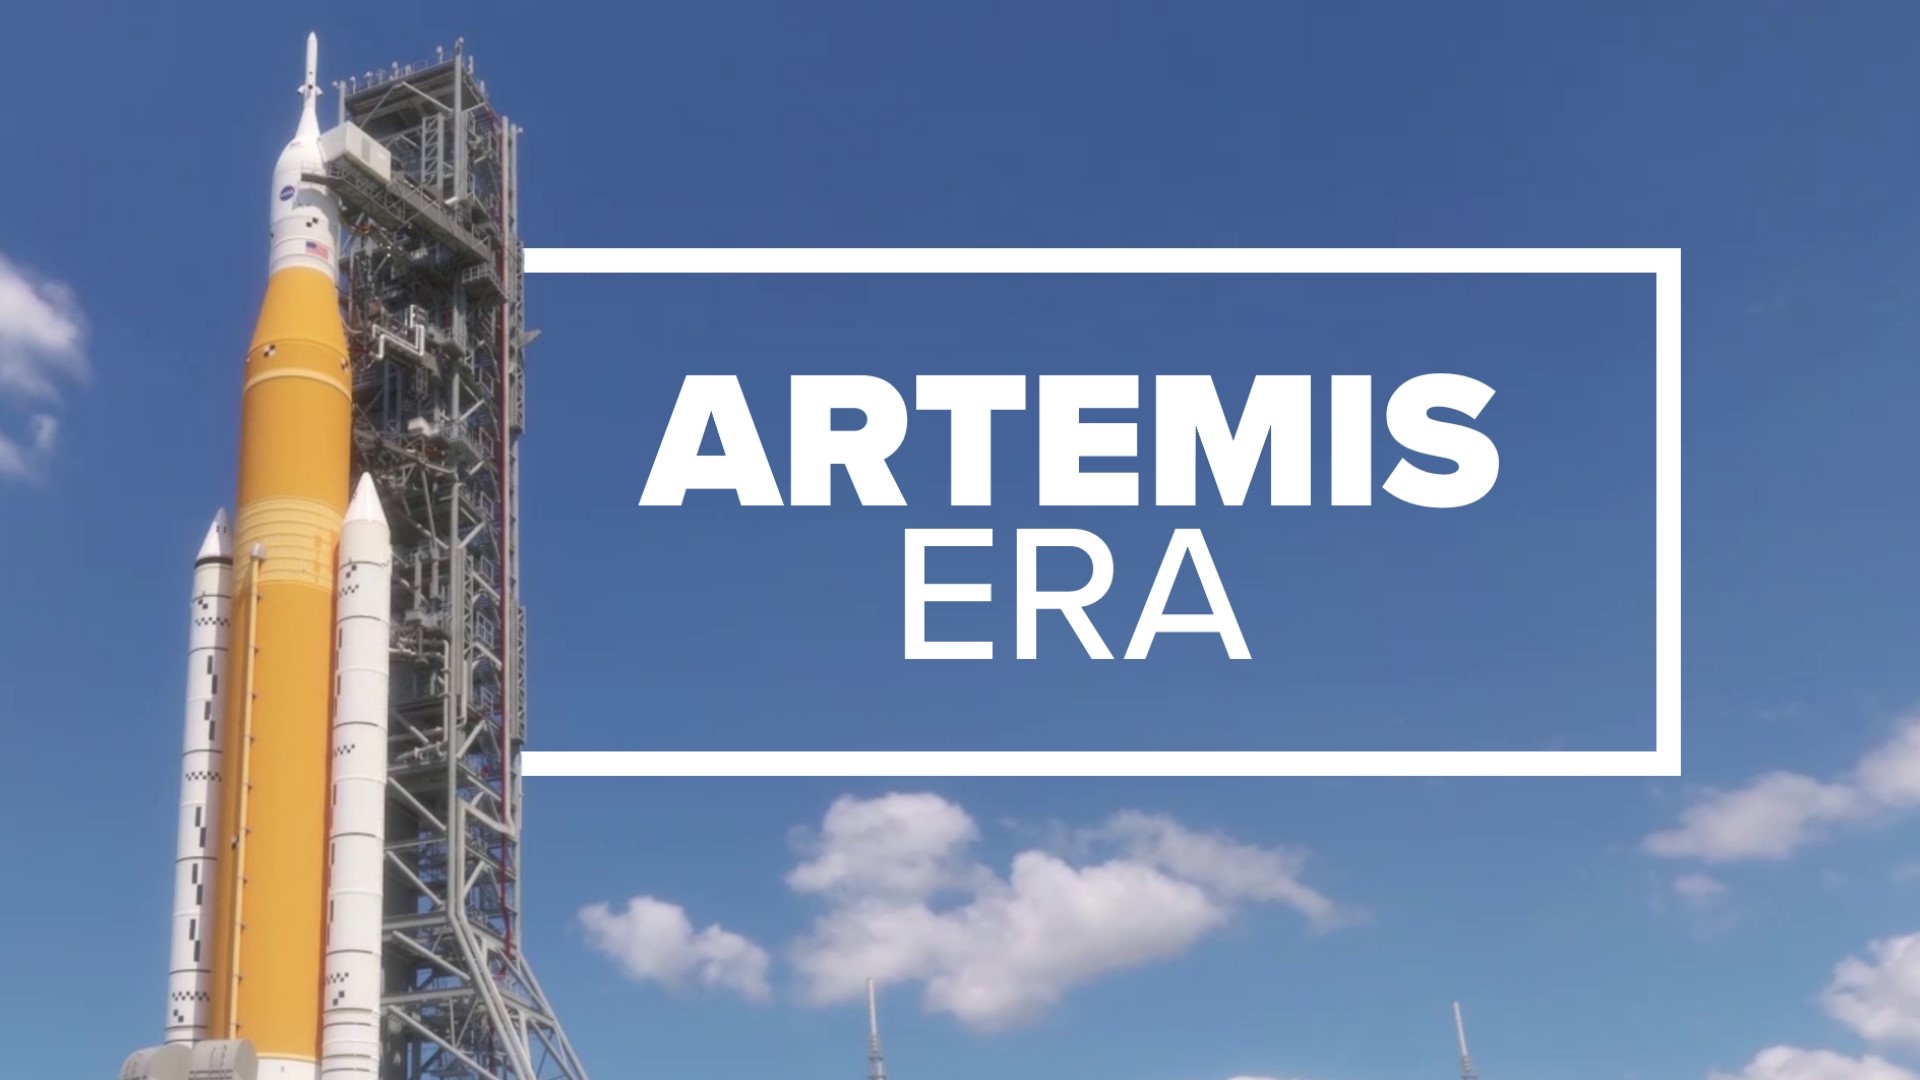 When the Orion rocket launches, mission control at Johnson Space Center in Houston will manage the 42-day Artemis I mission.